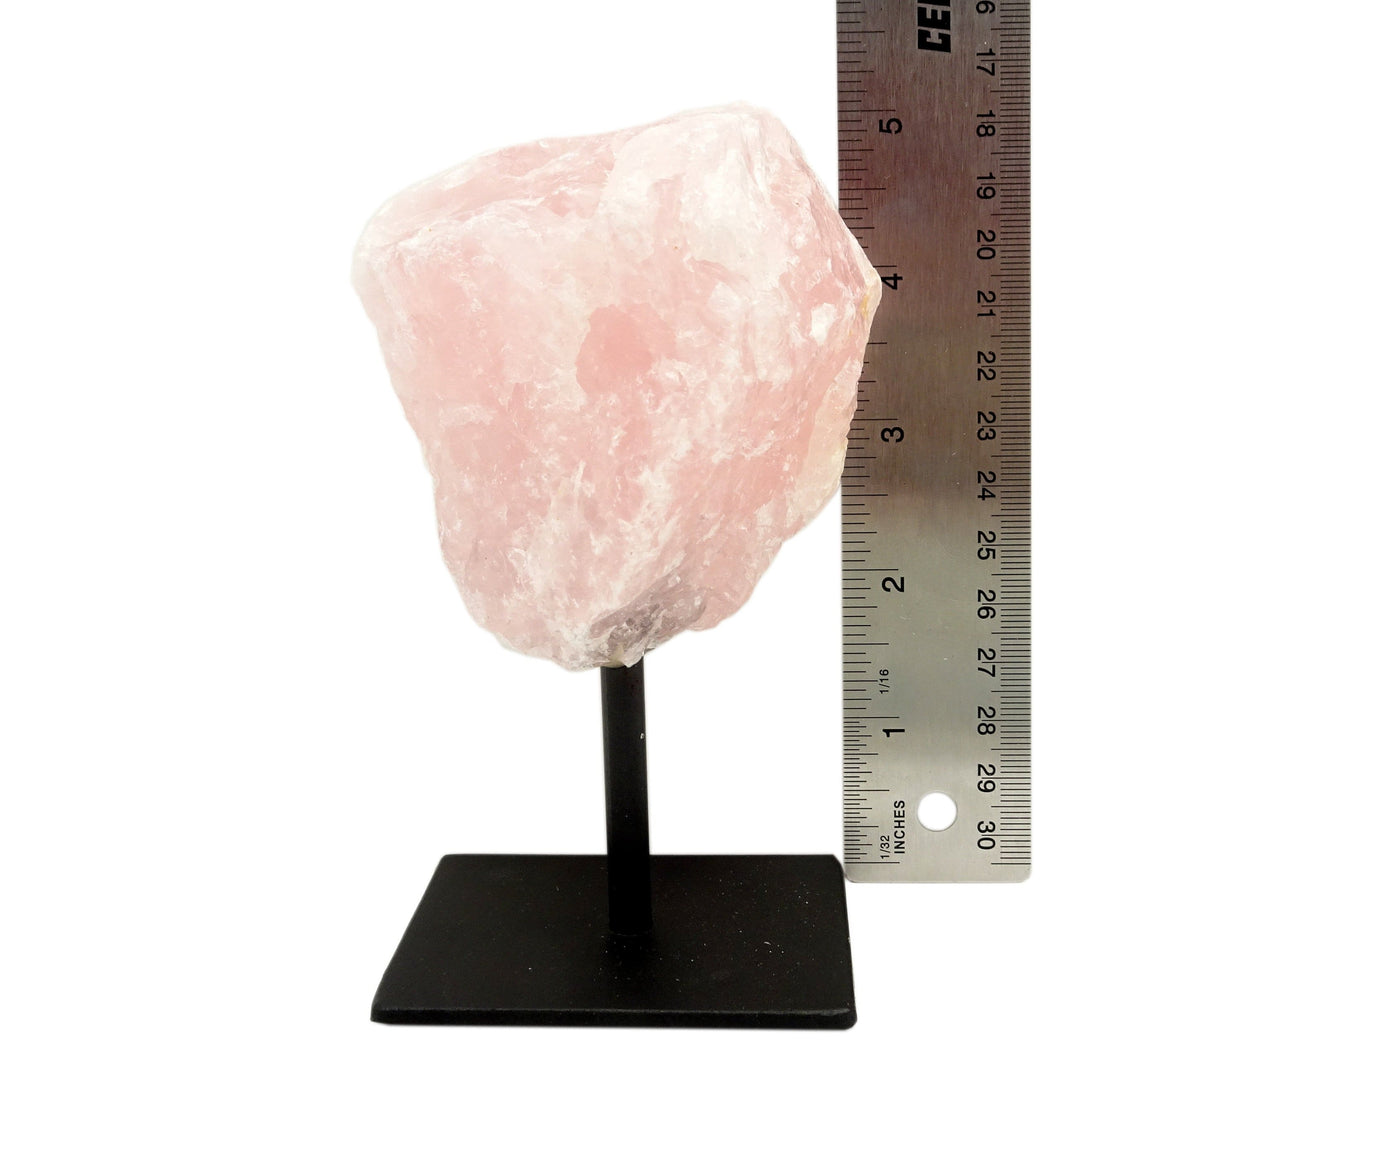 Rose Quartz on Metal Stand  next to a ruler for size reference on white background